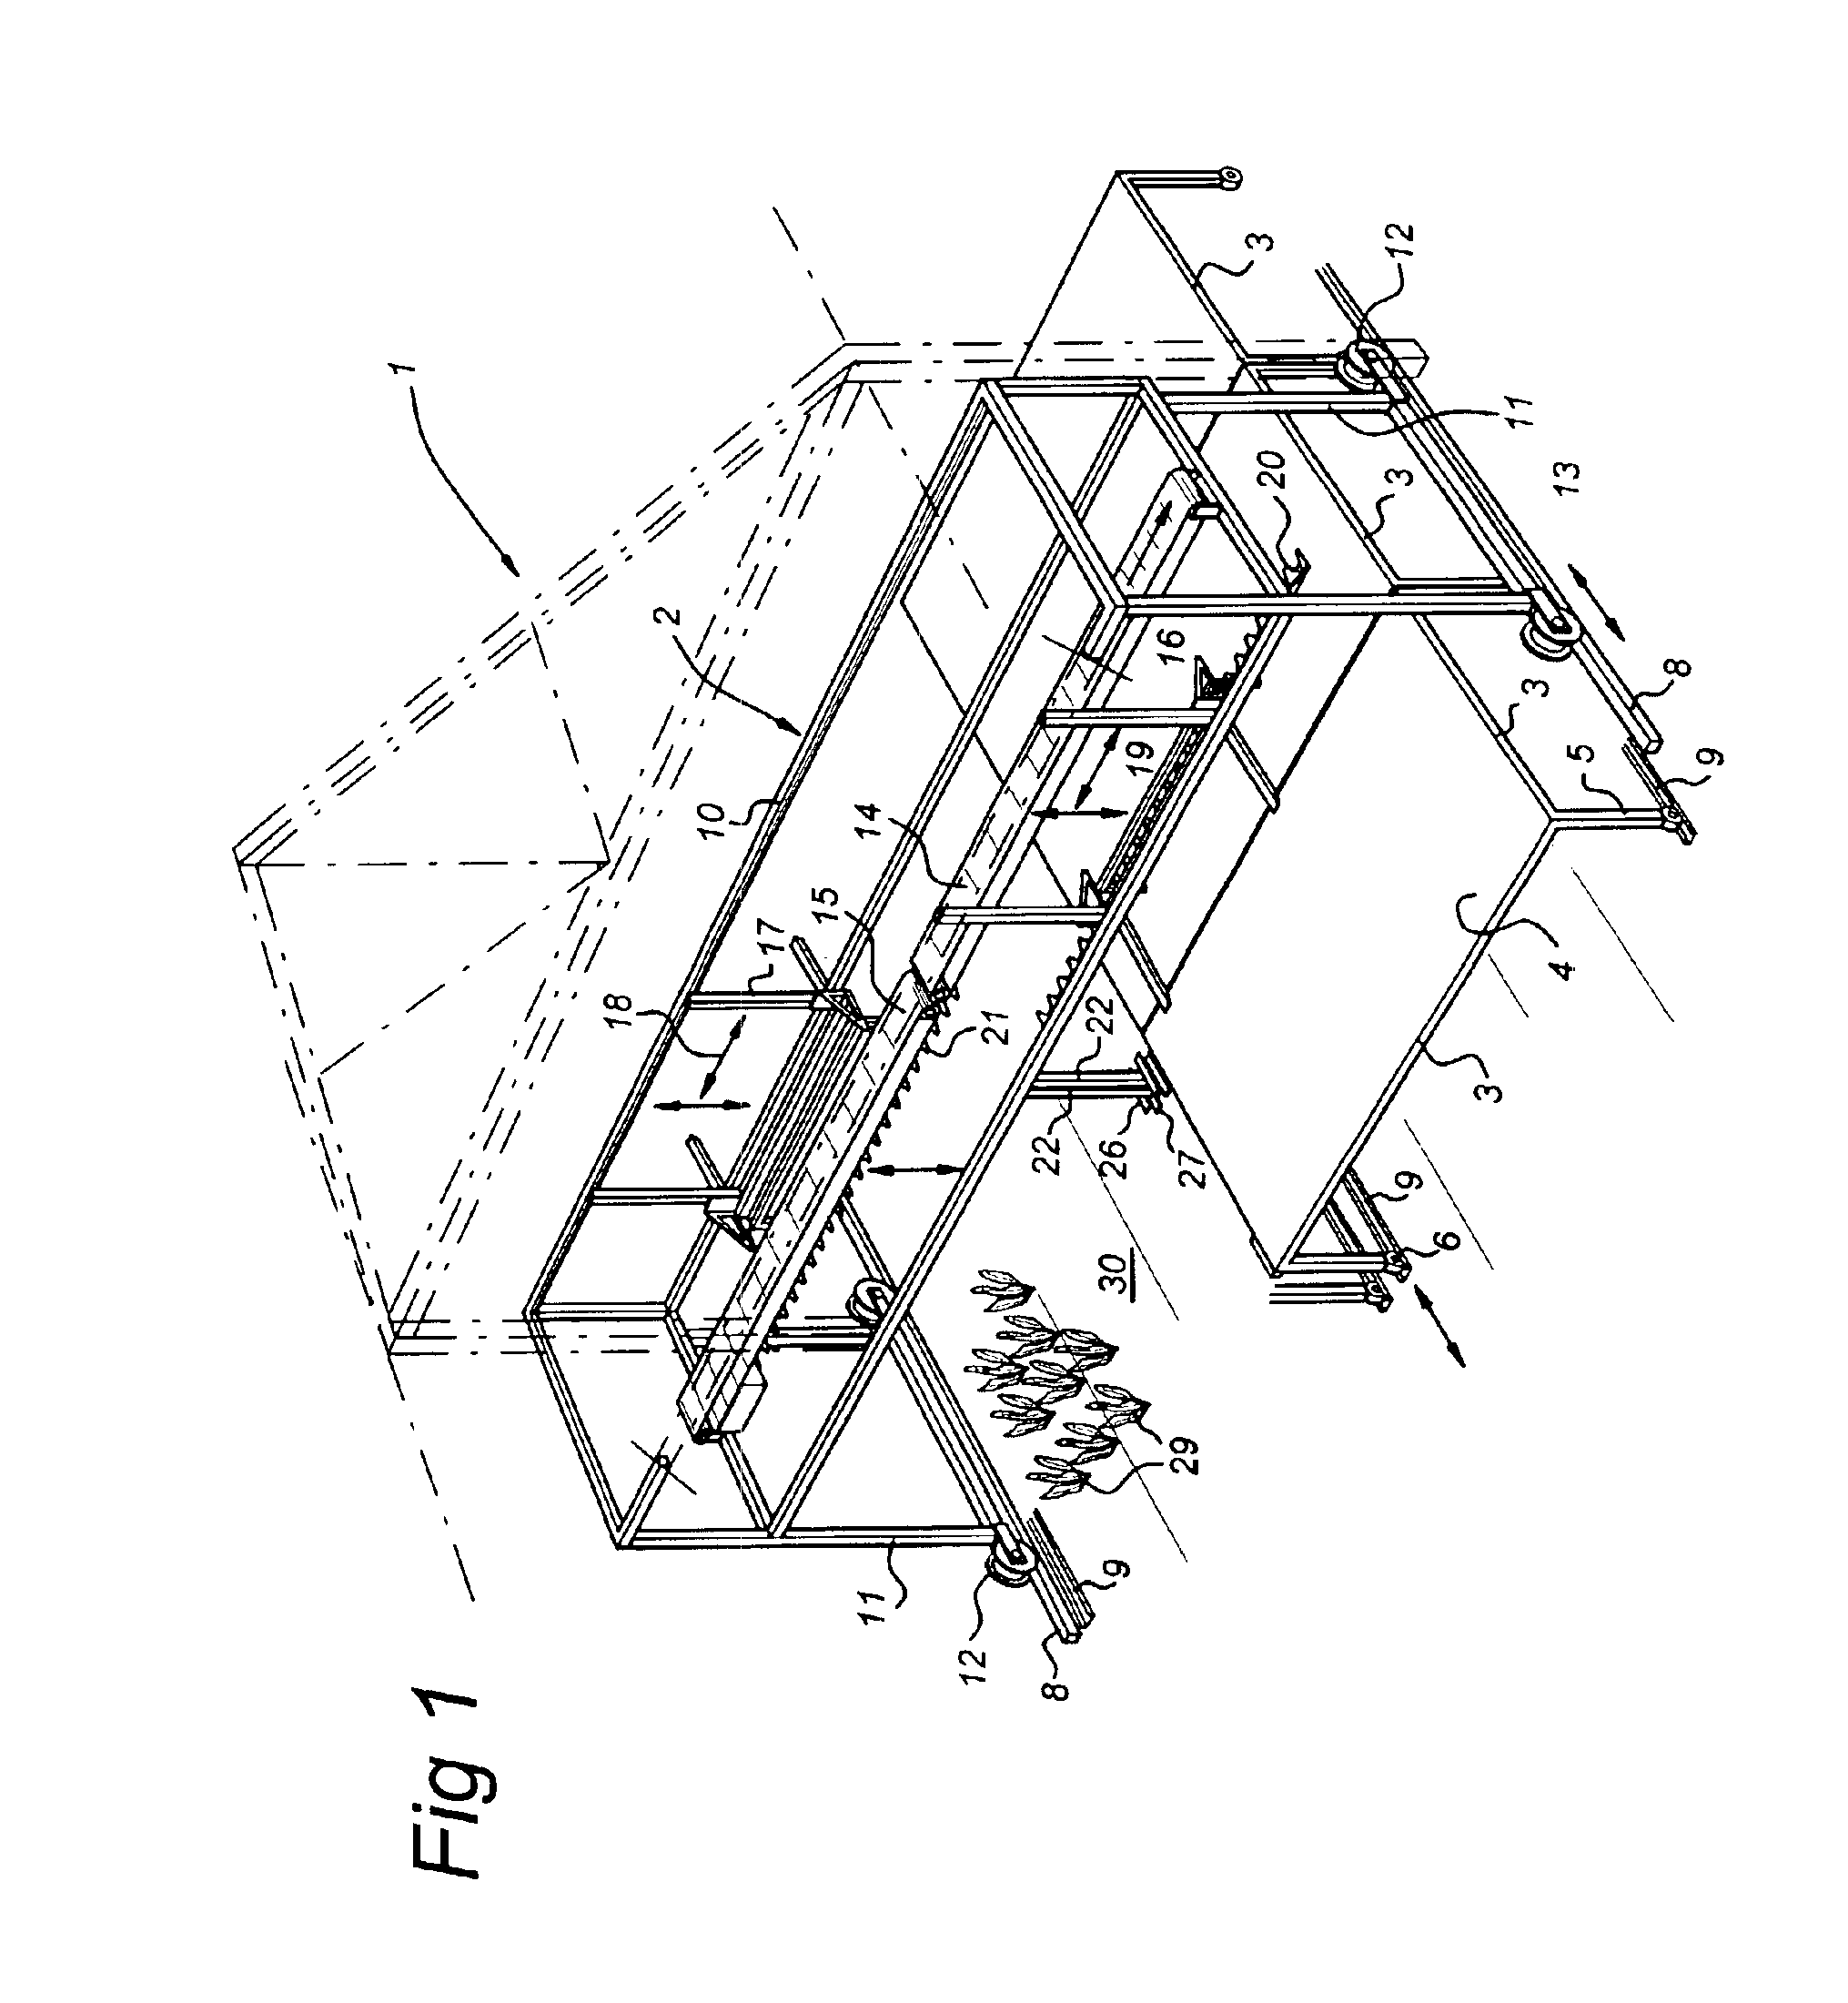 Method for growing plants accommodated in containers on a bearer provided at a first, low level in a glasshouse